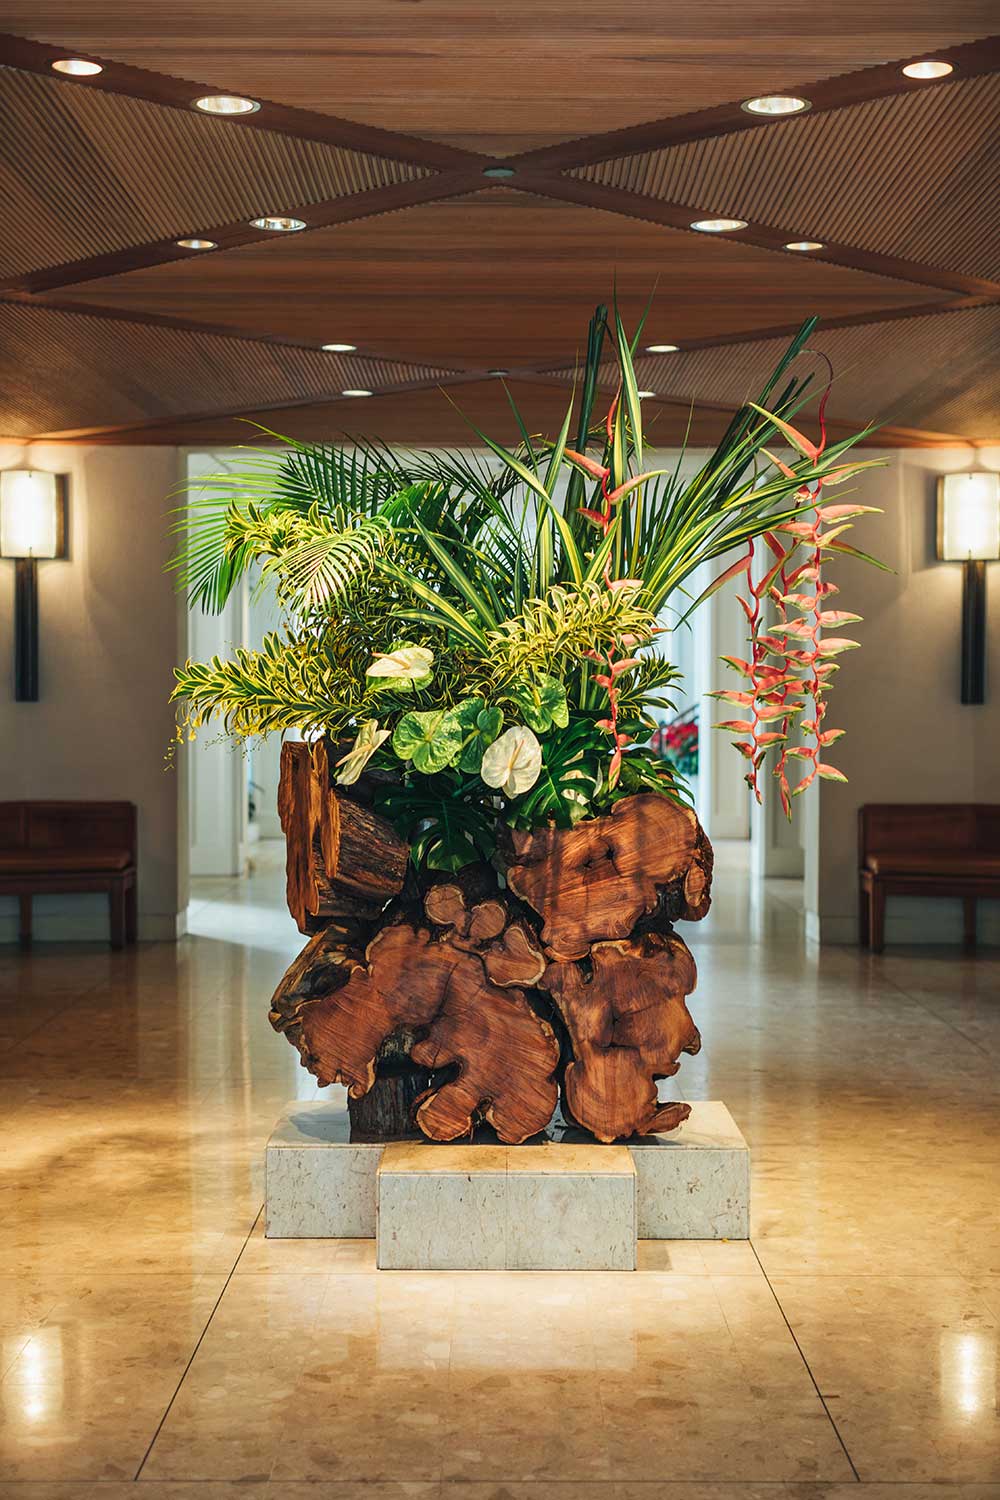 The finished kiawe sculpture greets guests upon their arrival in the Halekulani lobby. It symbolizes balance, serenity, and the natural world.